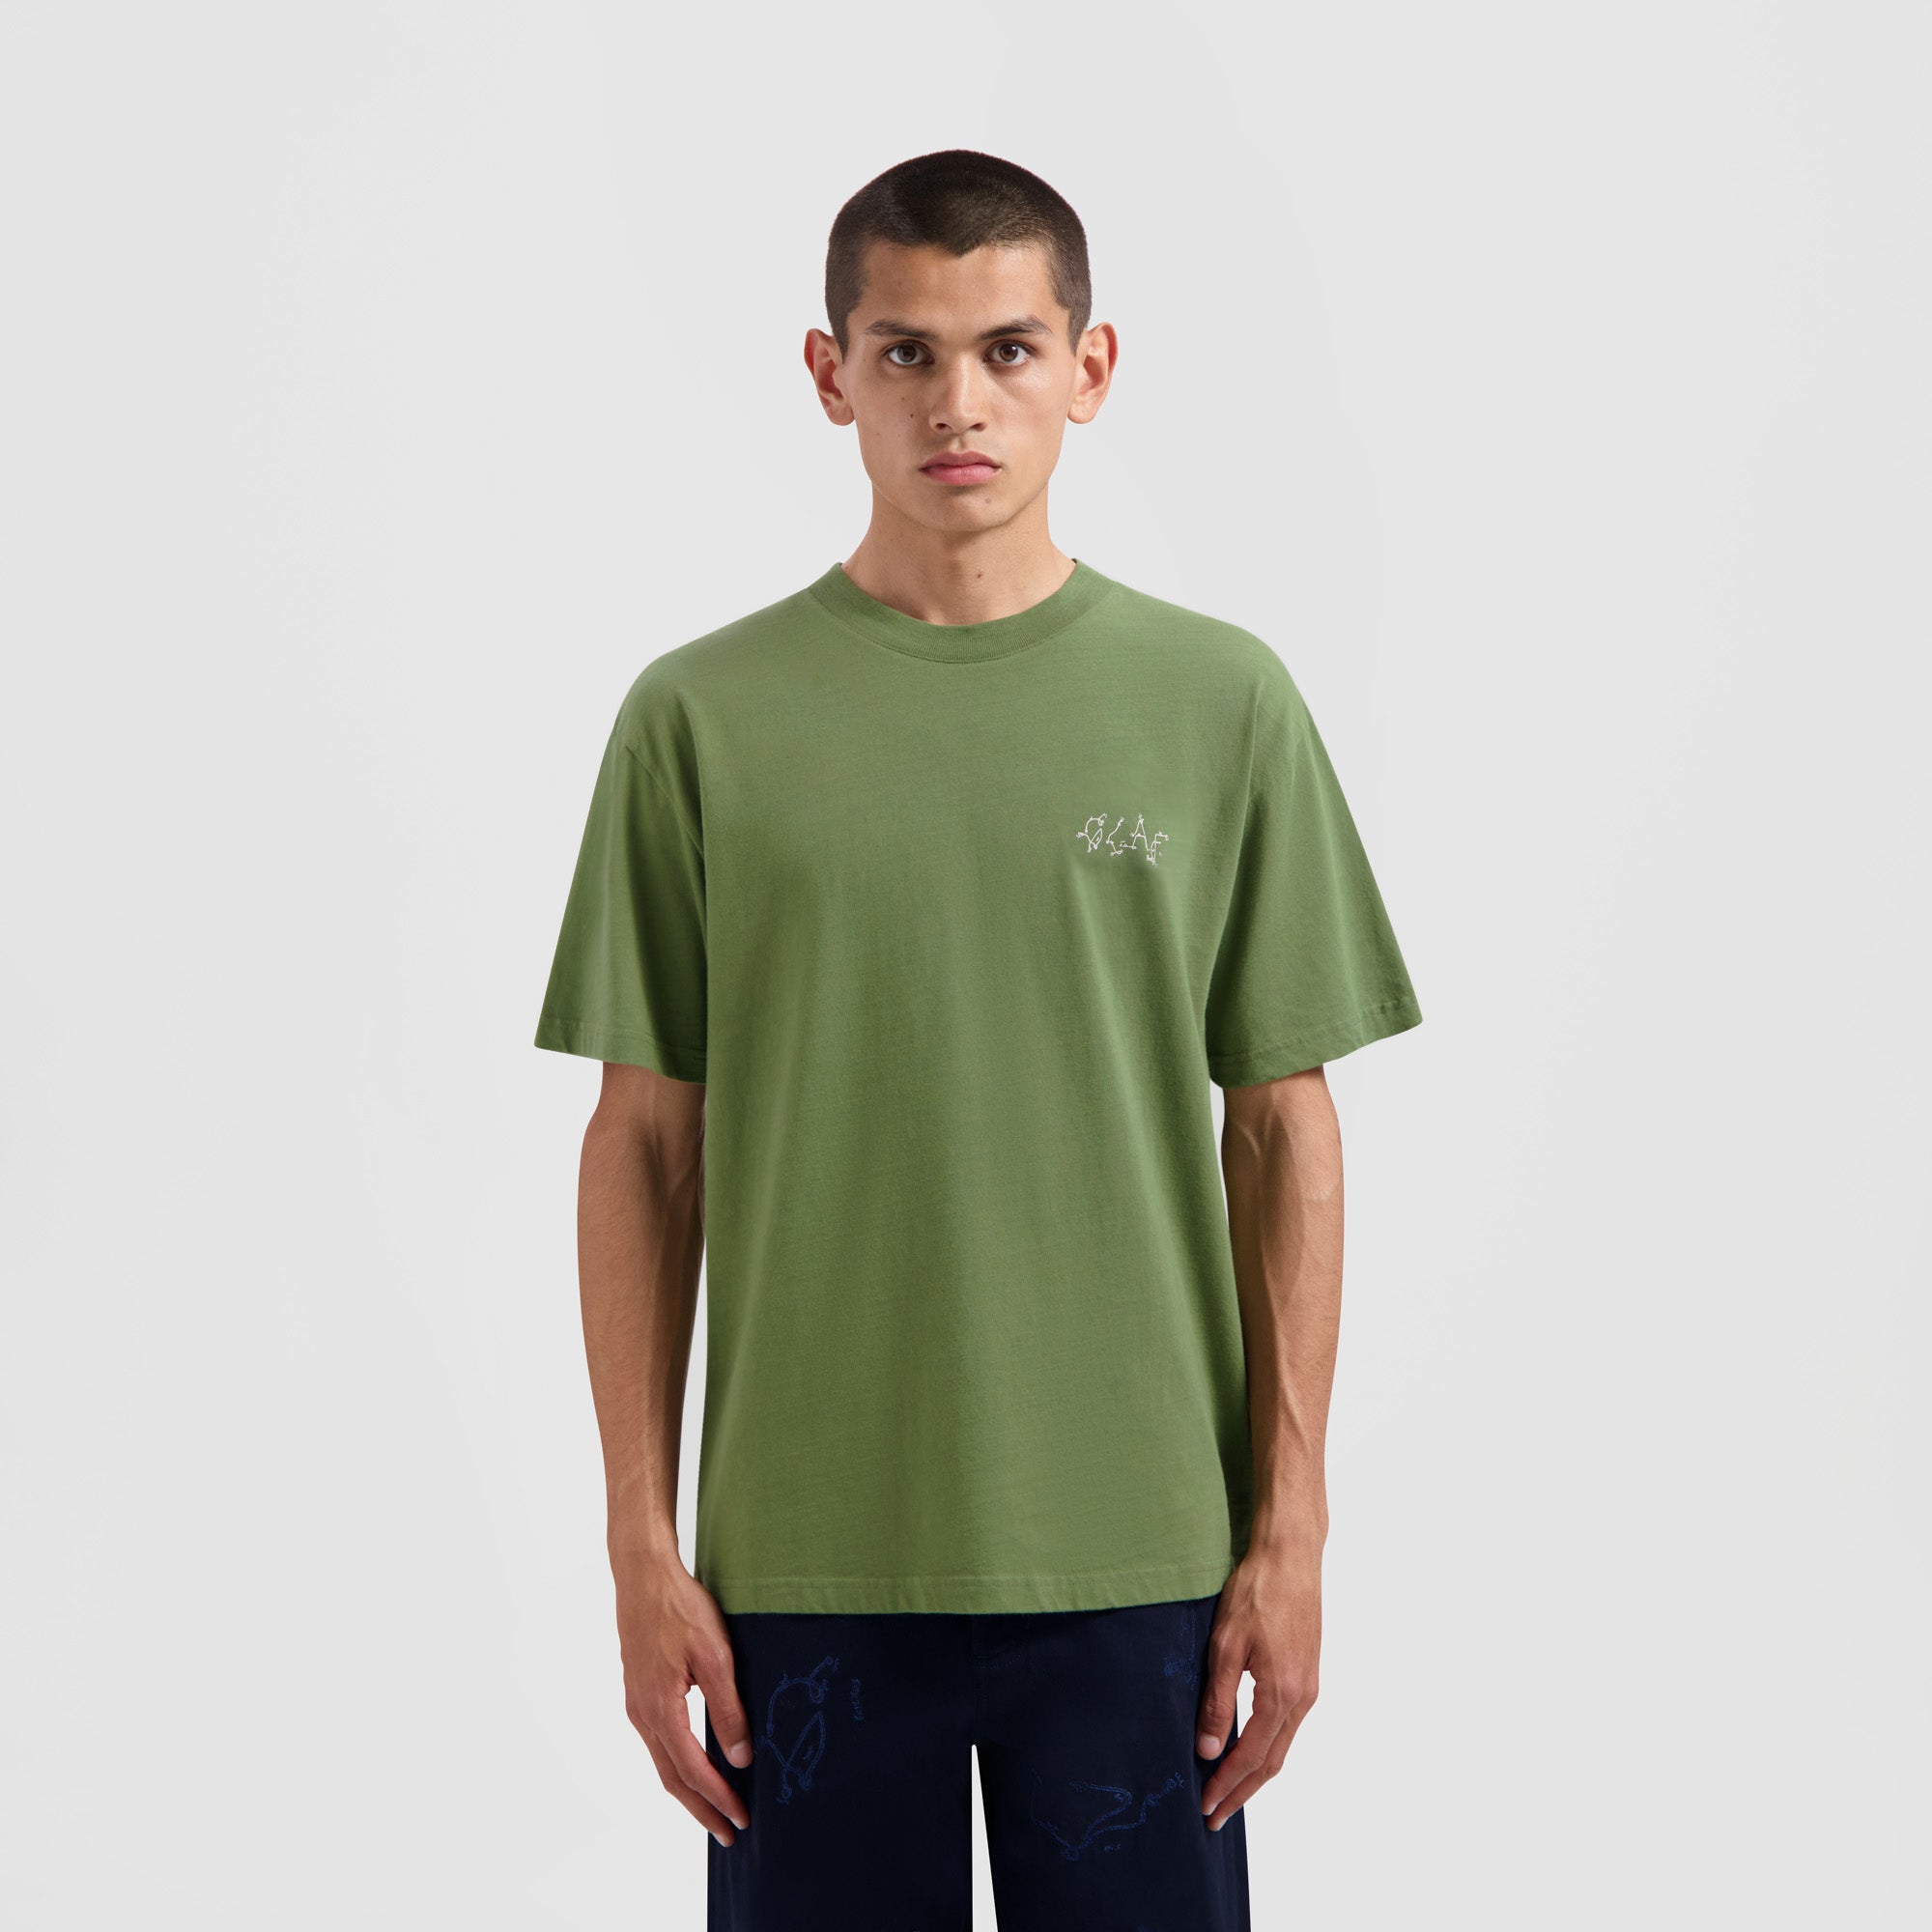 Knot Tee - Army Green